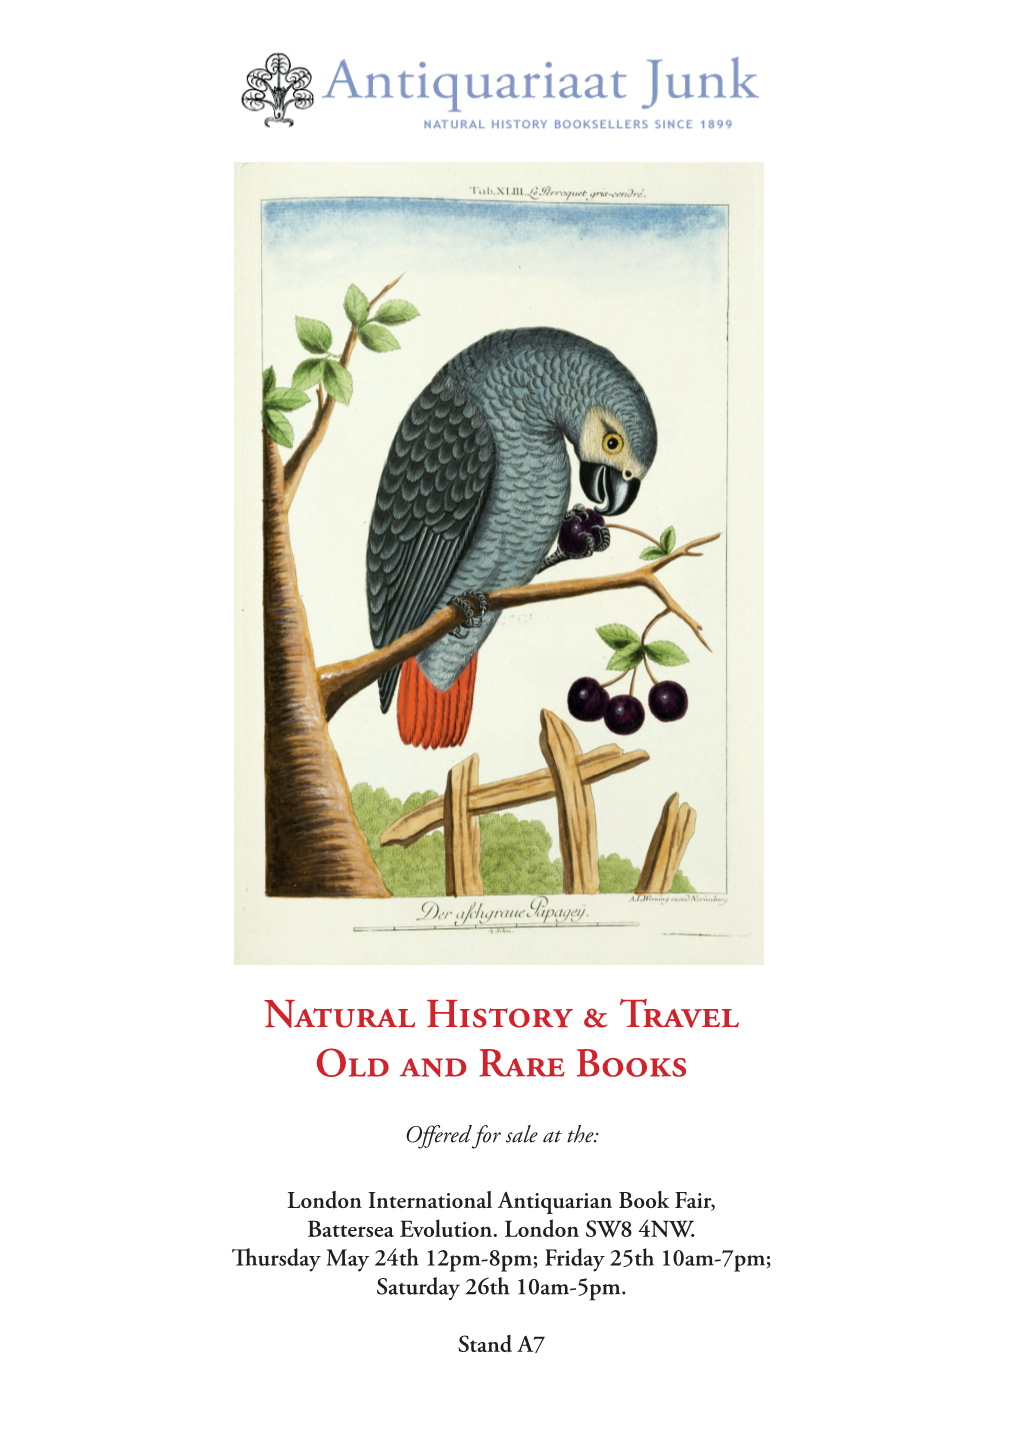 Natural History & Travel Old and Rare Books